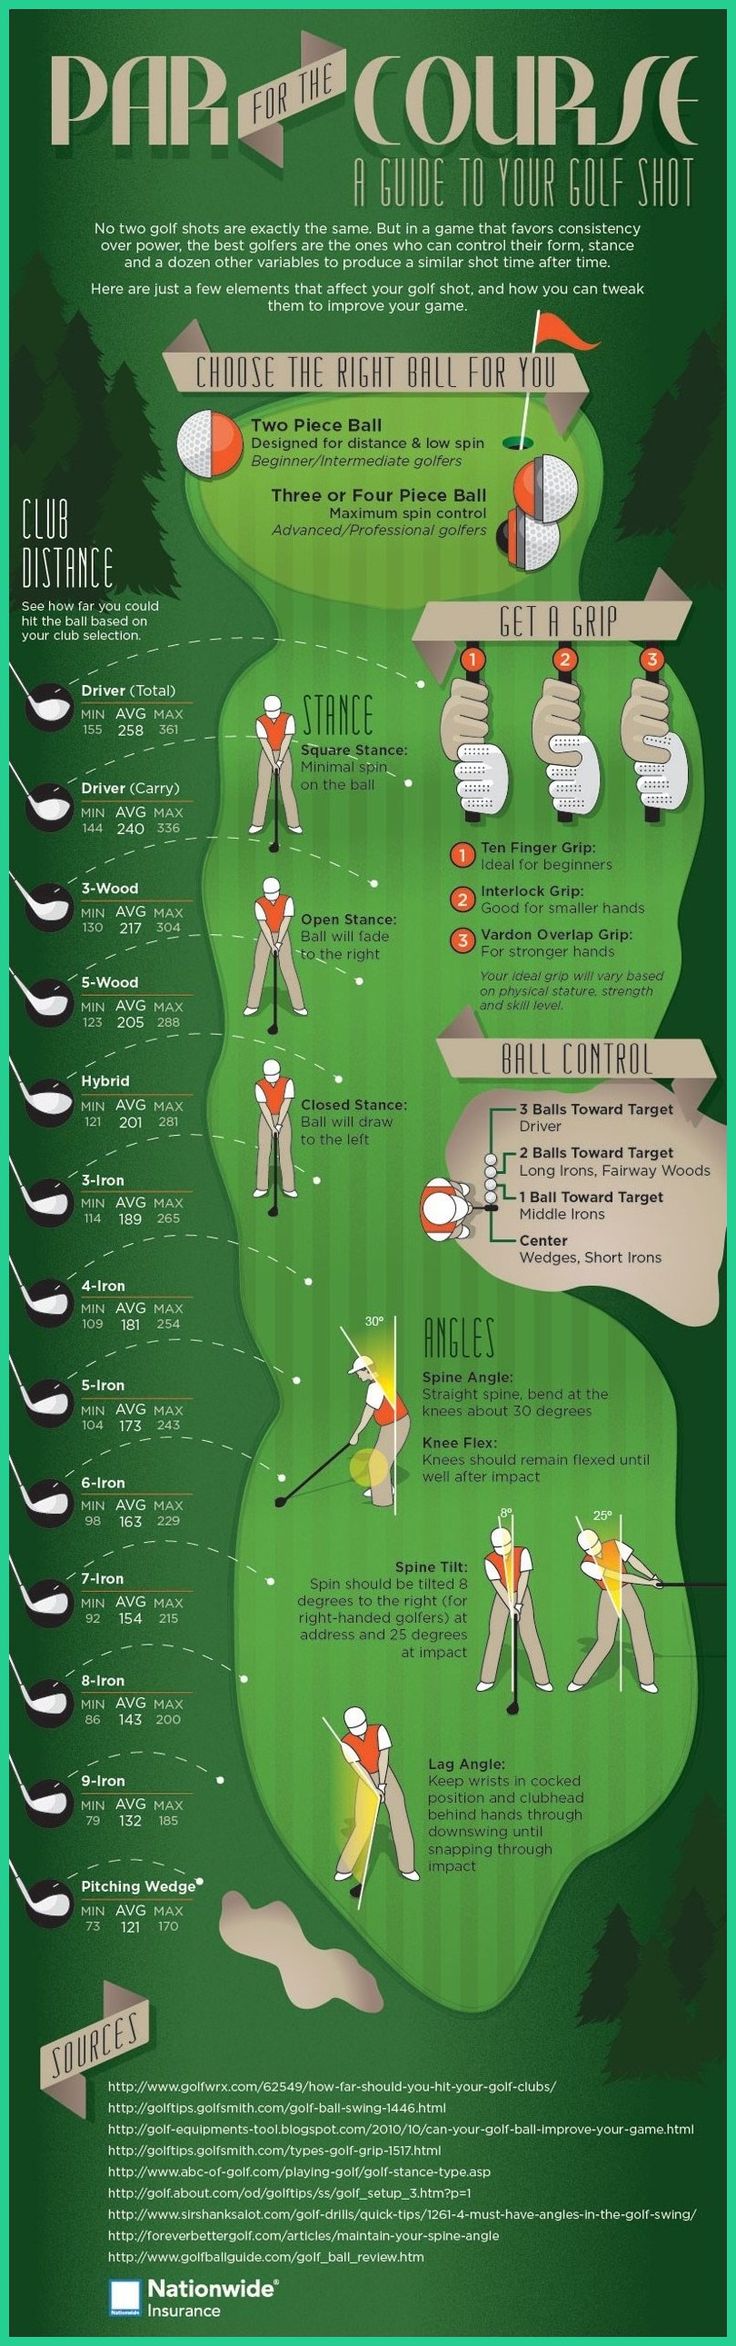 essential golf equipment for every player golf clubs check out the image